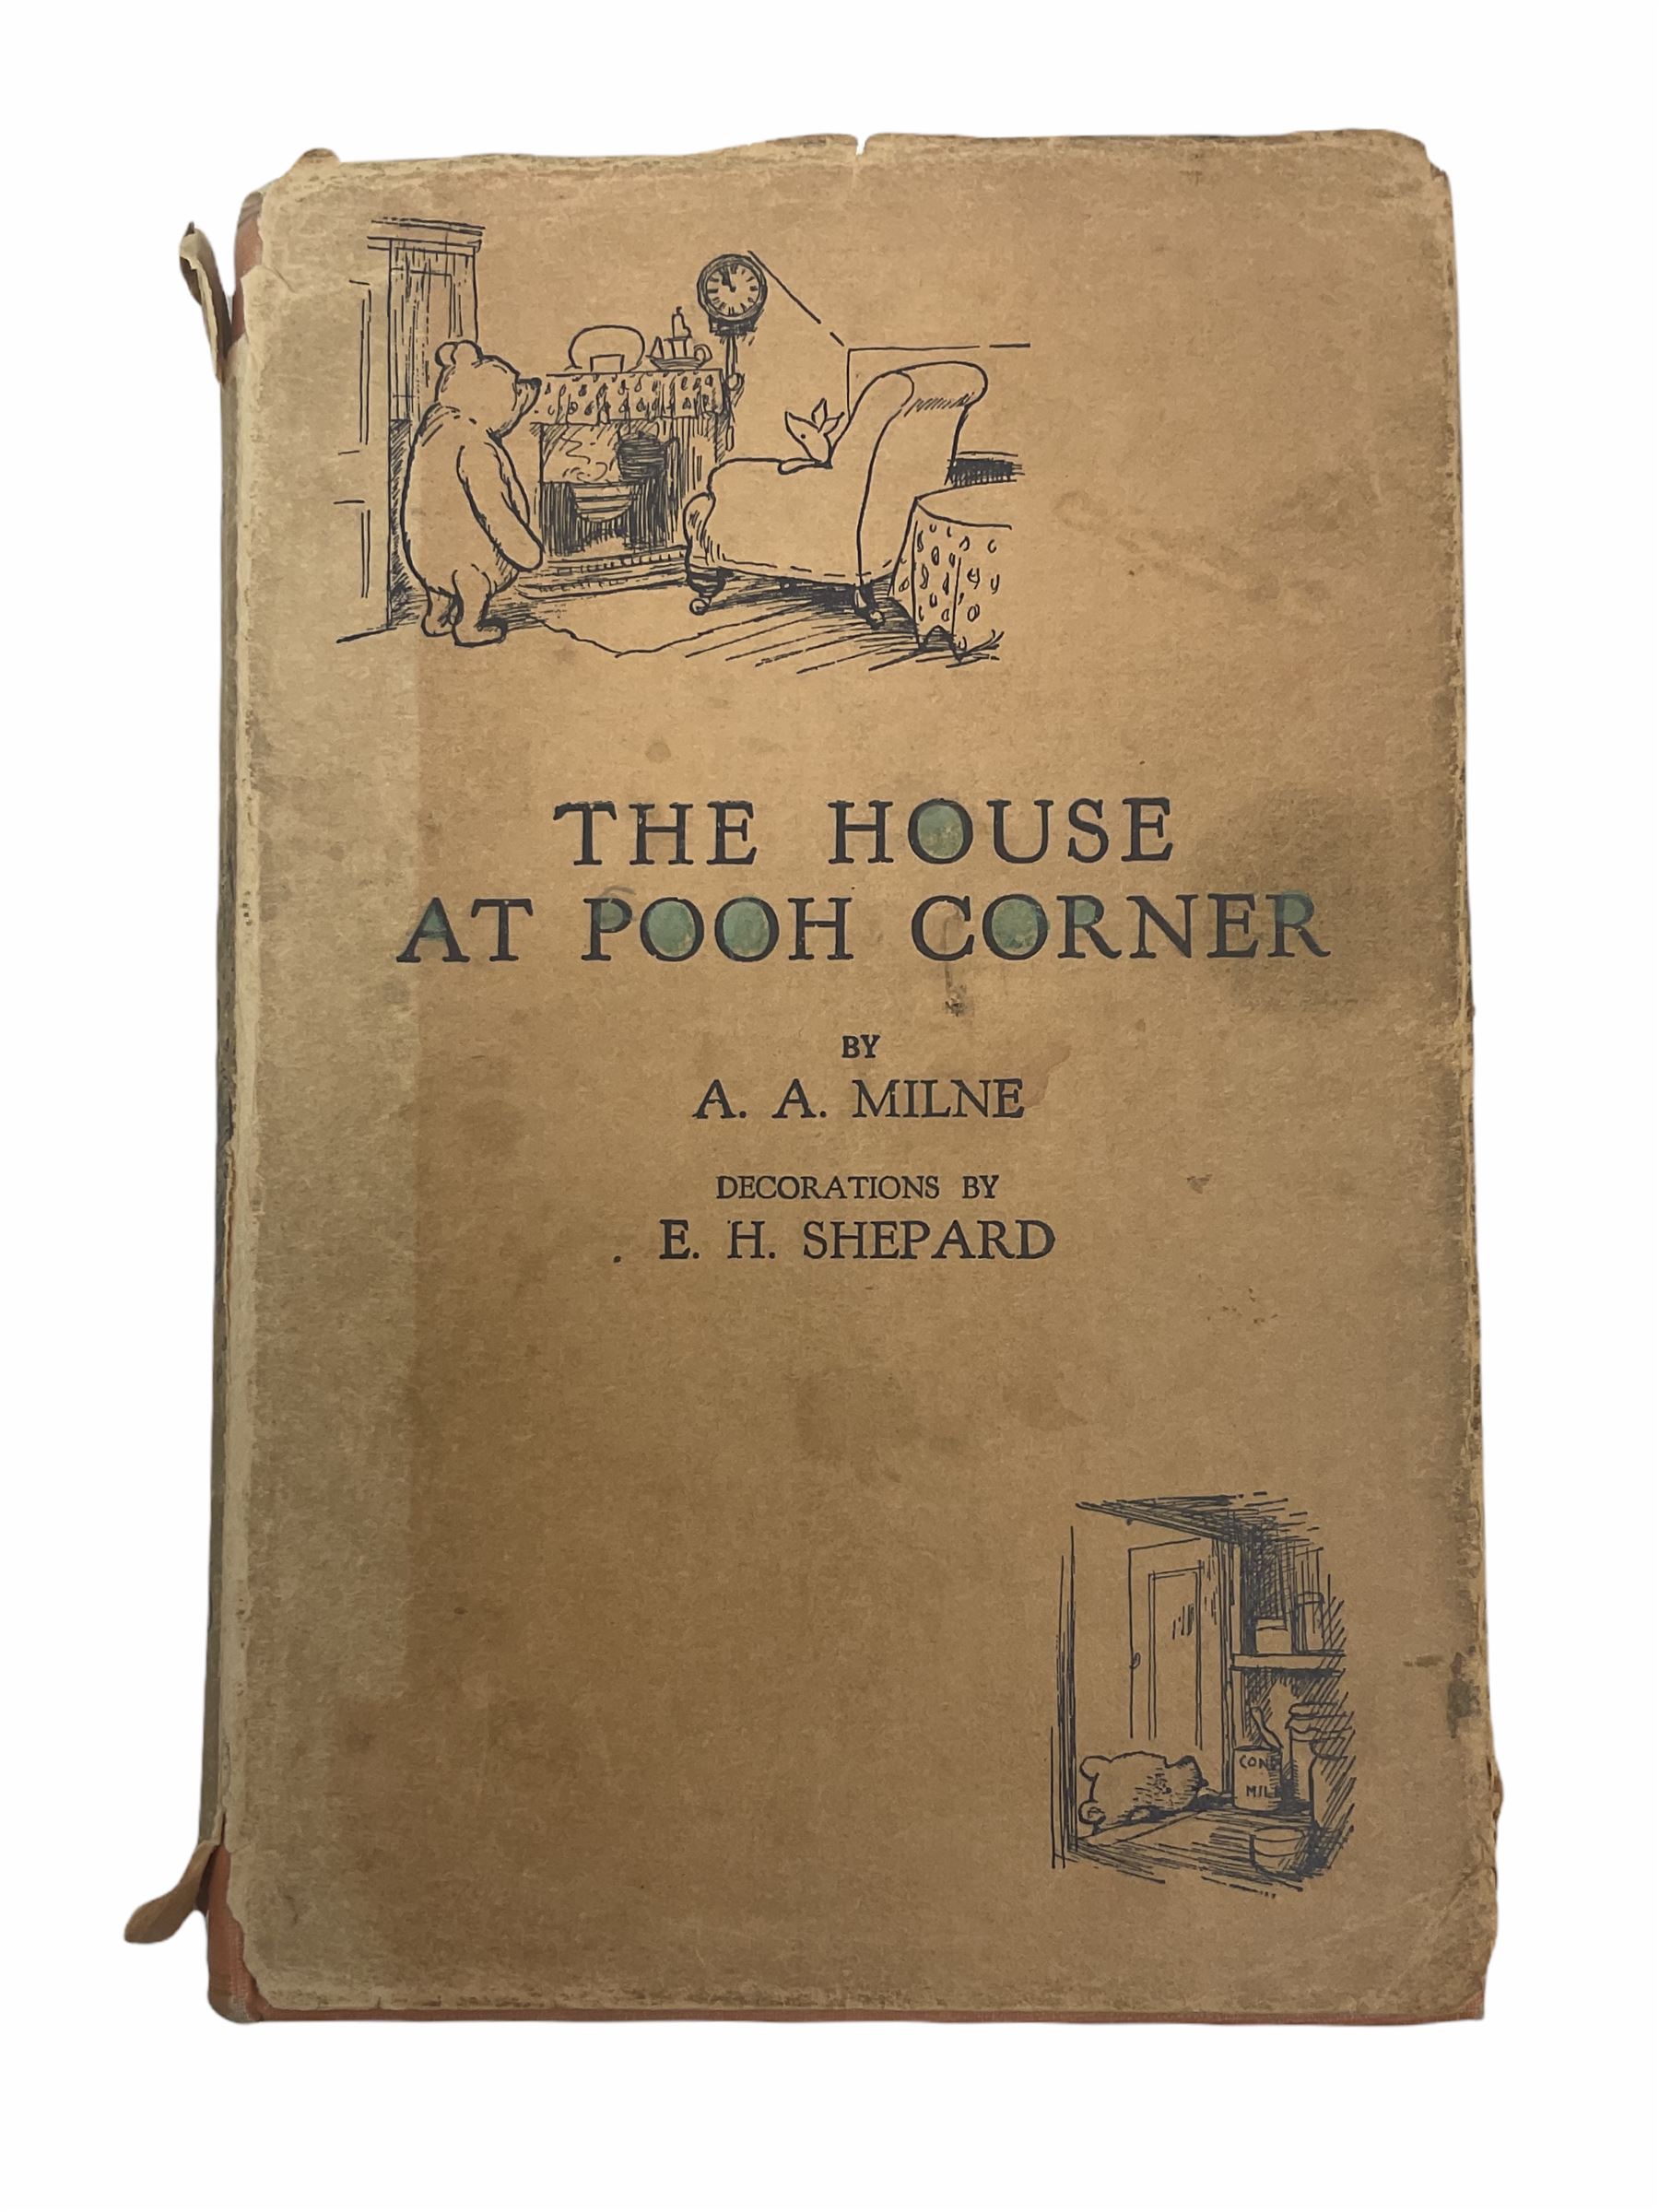 Five A.A. Milne Winnie The Pooh books illustrated by E.H. Shepard - The House at Pooh Corner. 1928. - Image 7 of 13